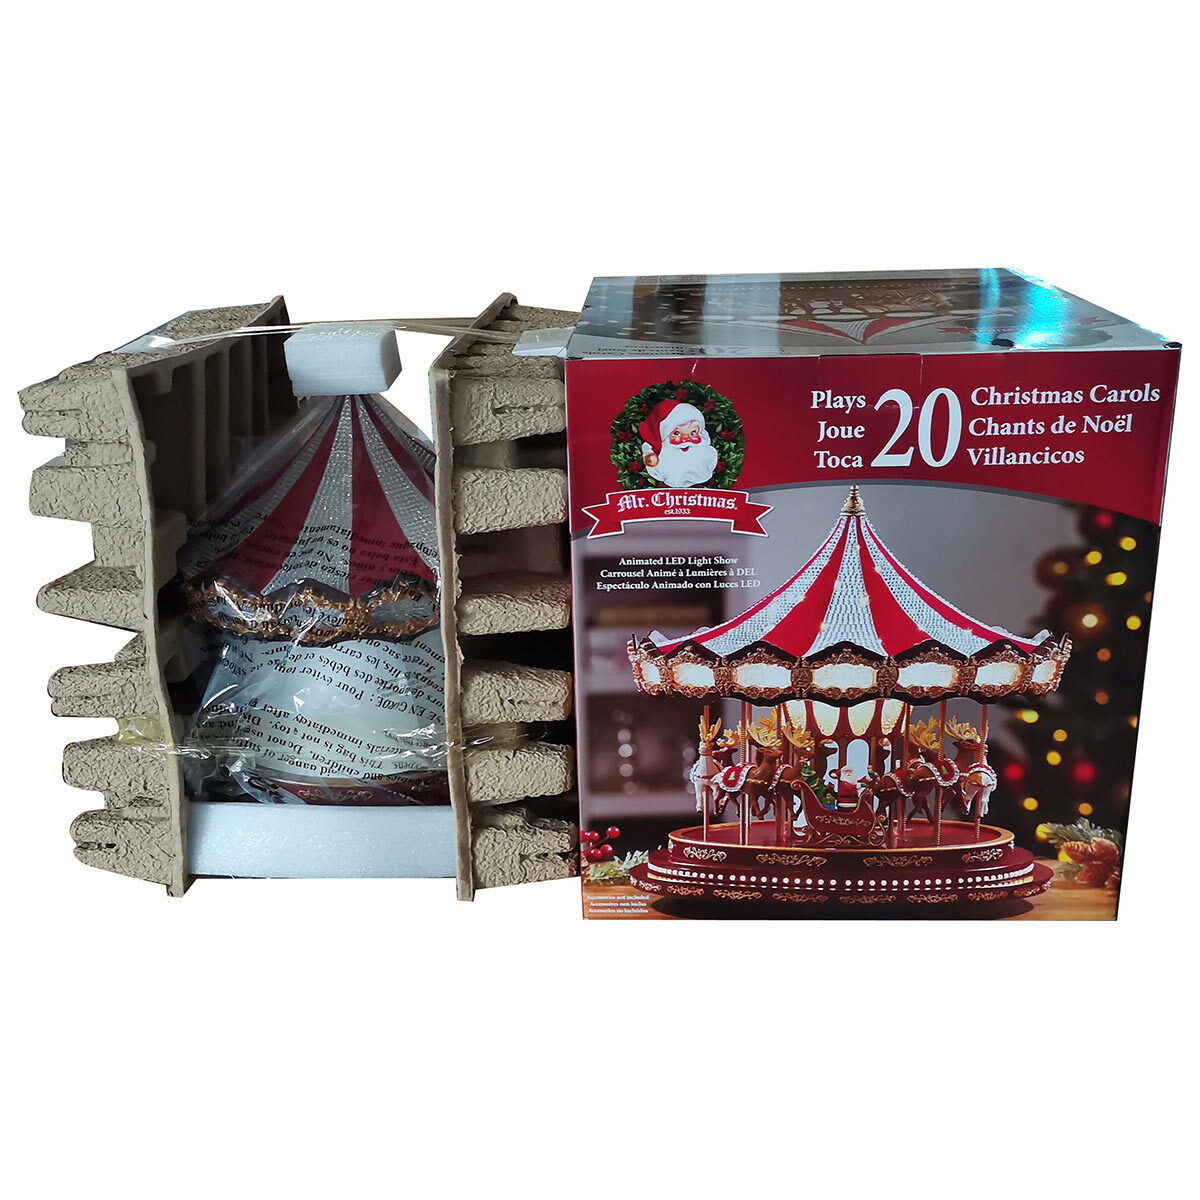 Buy Deluxe Christmas Carousel Box Image at Costco.co.uk